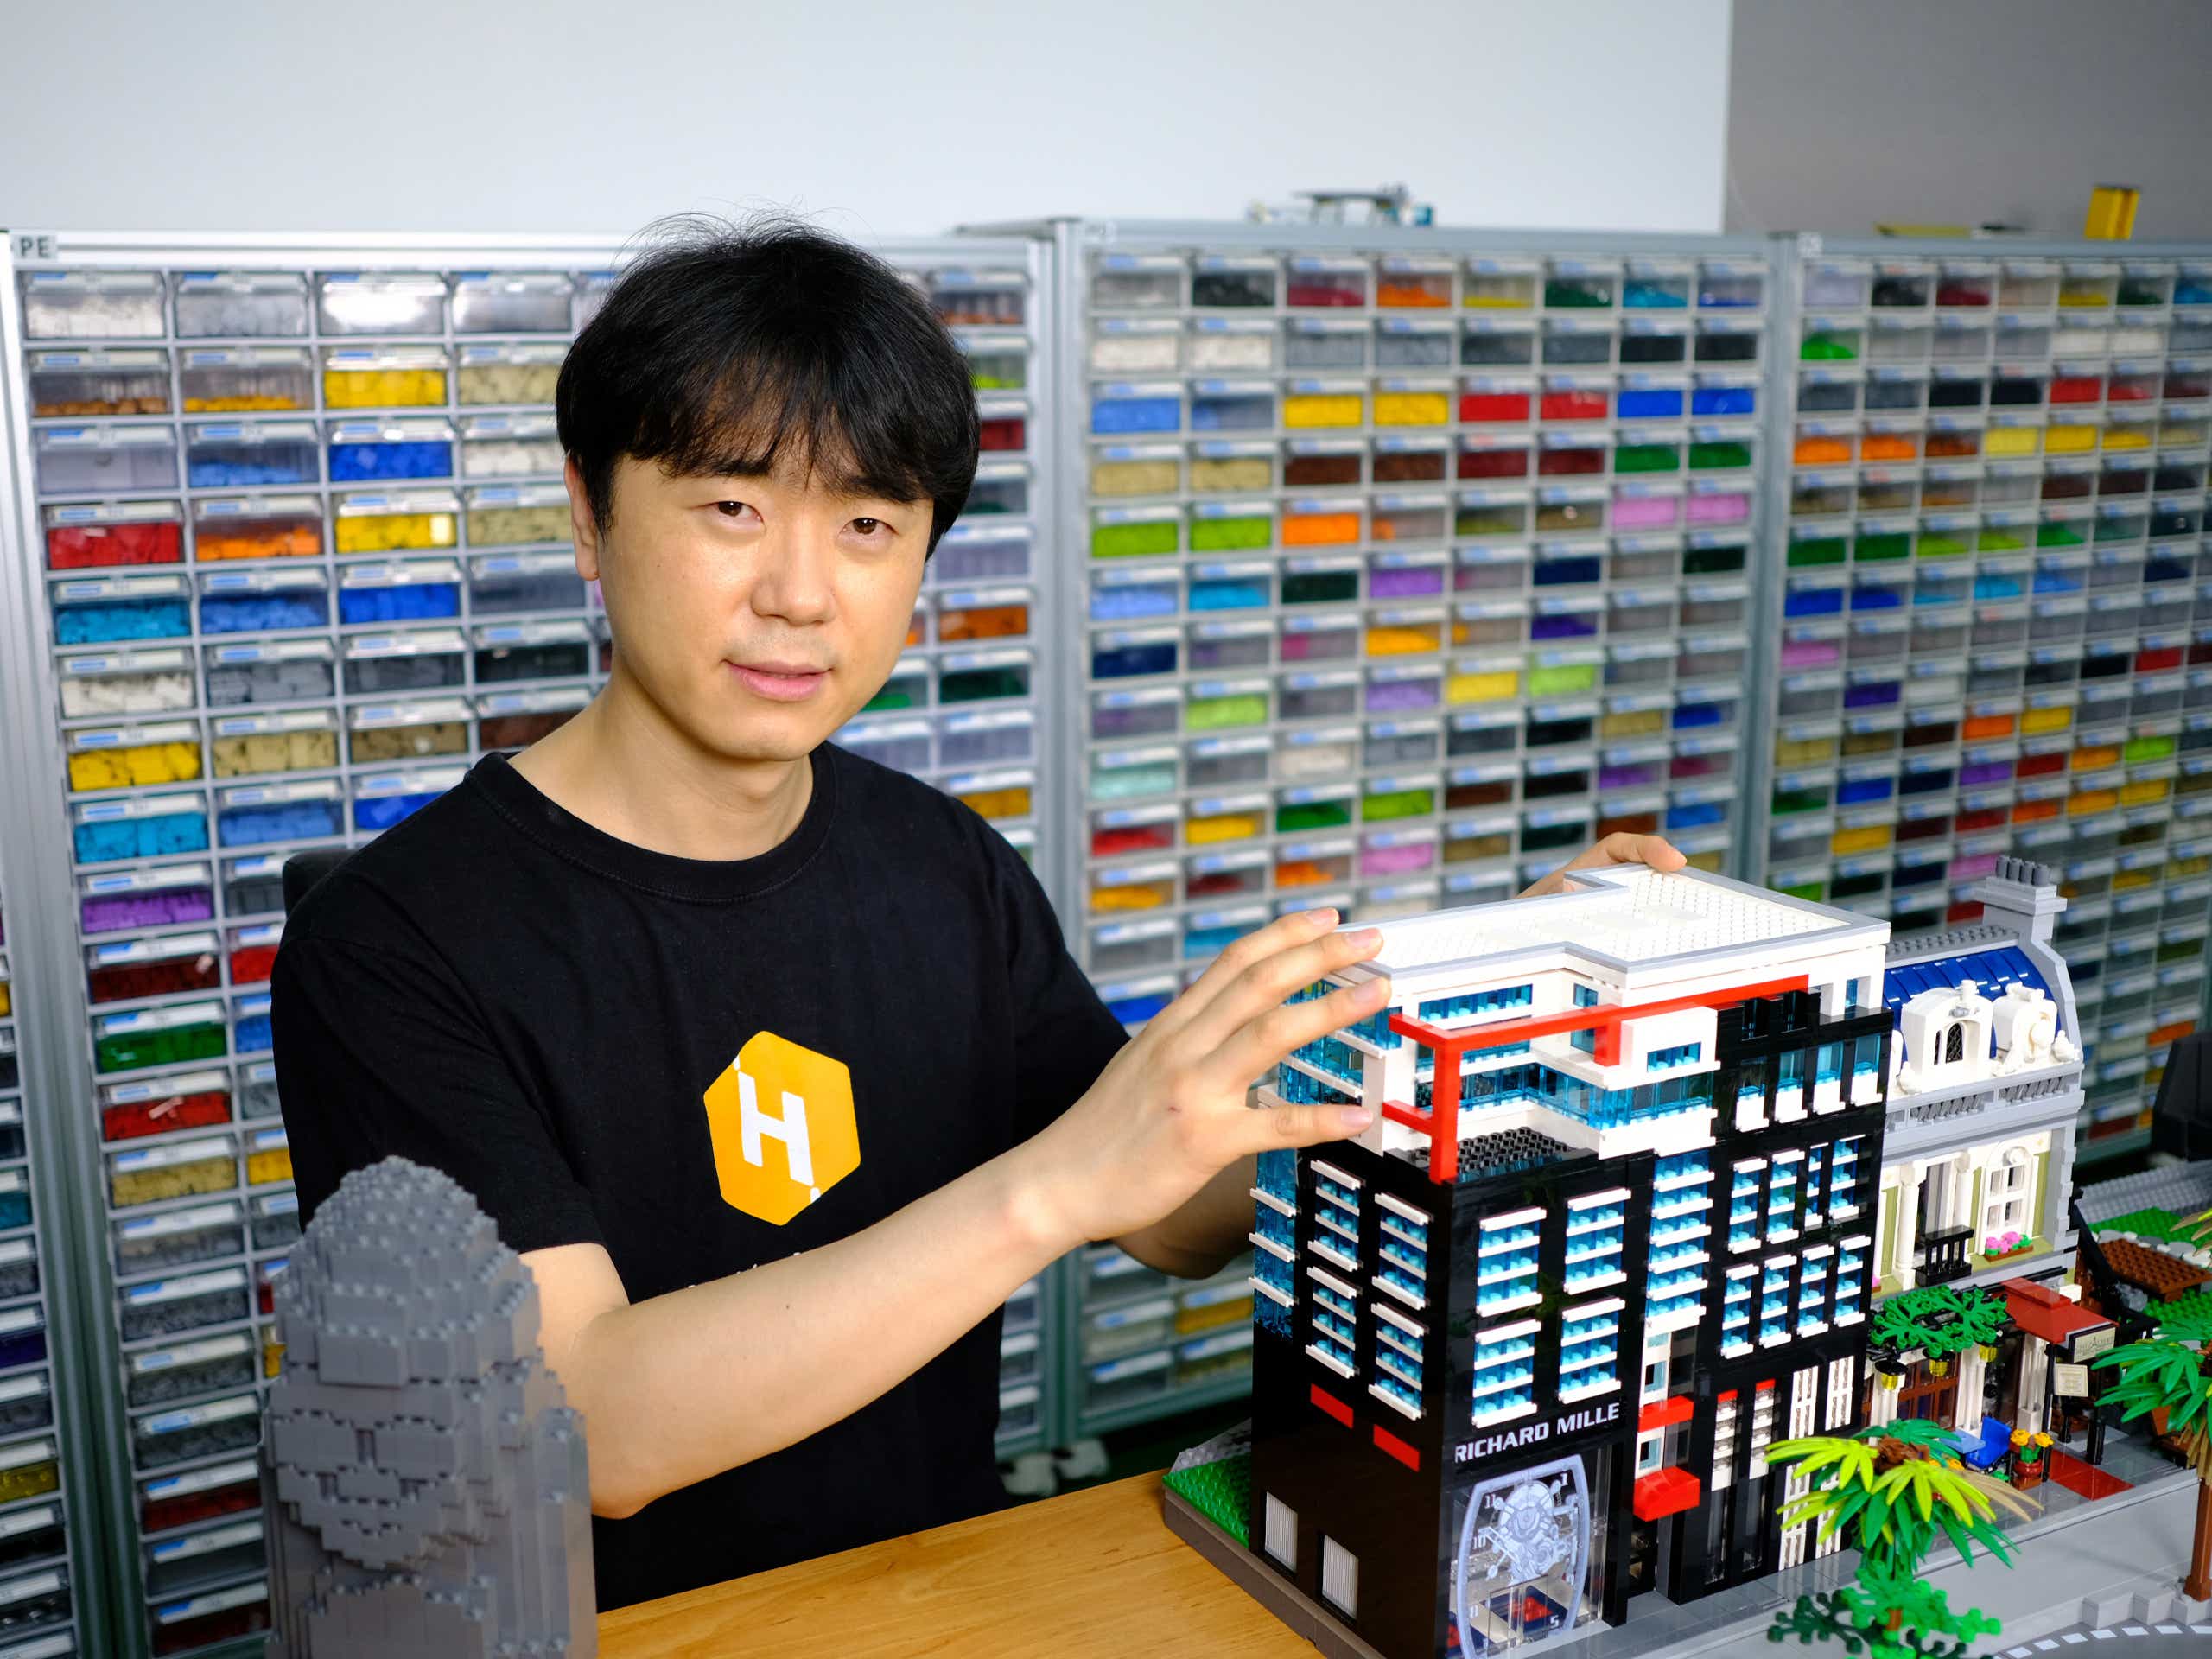 Kim Seong-wan, the first LEGO Certified Professional (LCP) in Korea with his LEGO creation and office